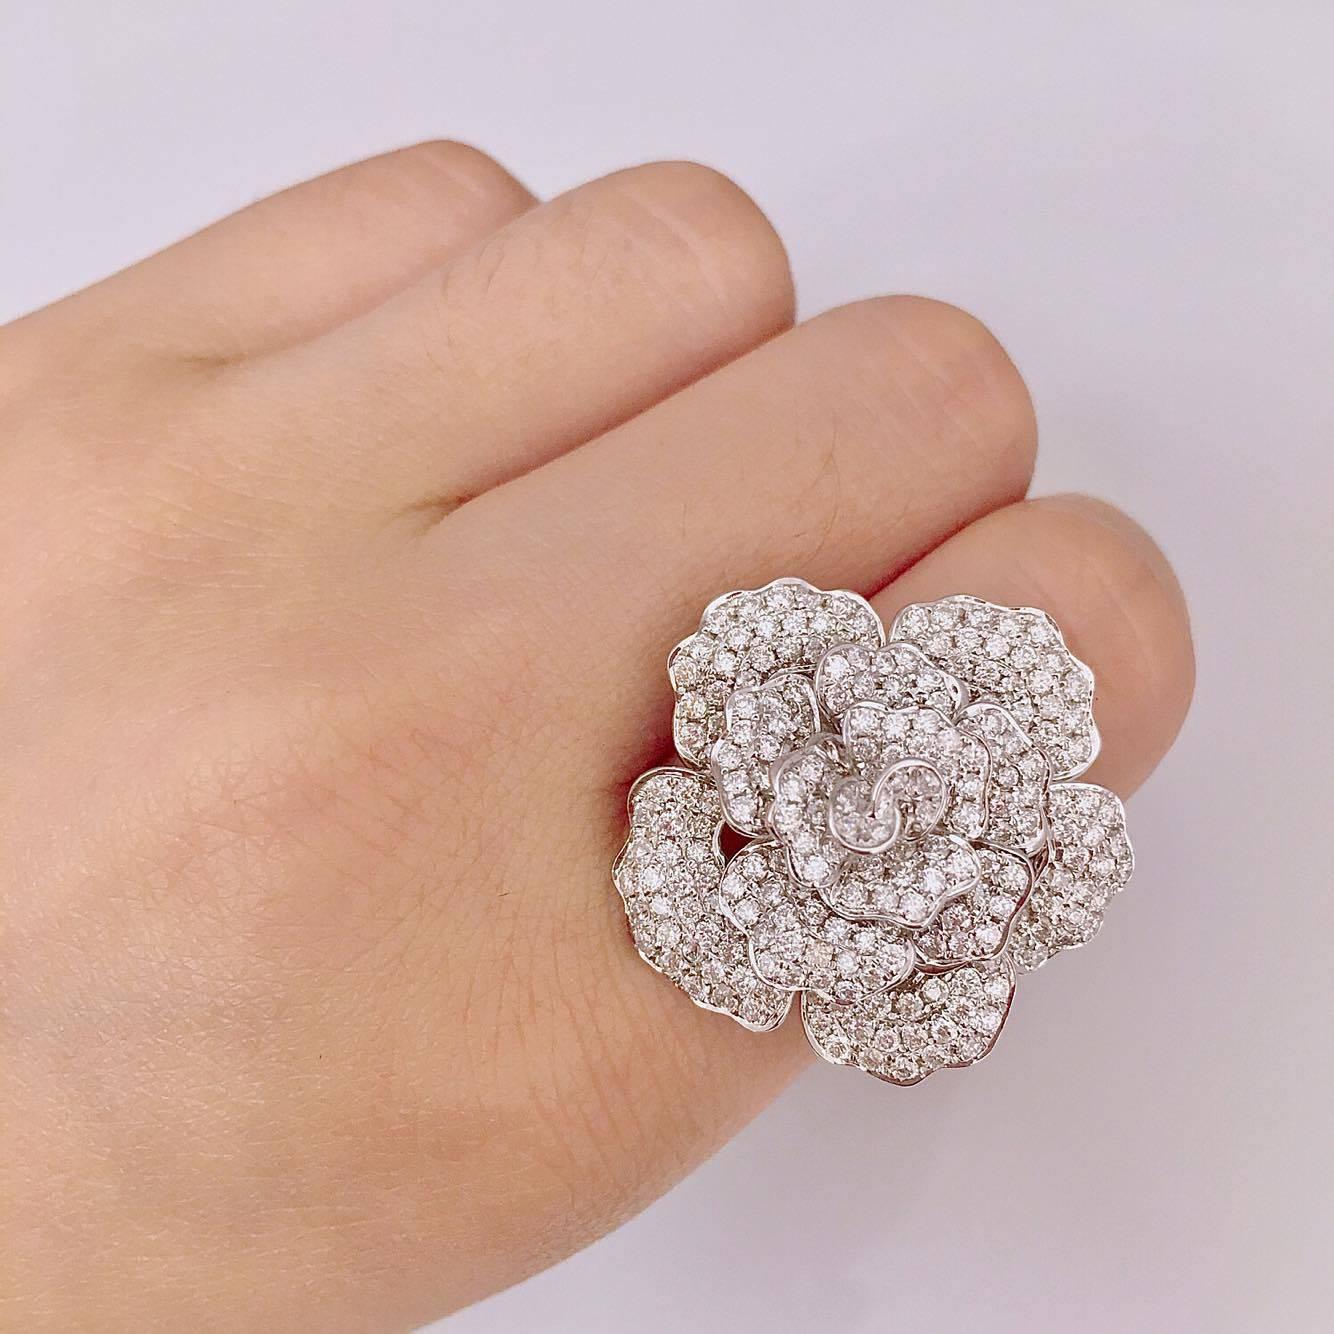 This Ring was designed and manufactured by Emilio! 243 diamonds are carefully hand set with a microscope by our skilled craftsman. 
Approx weight: 2.40cts
243 diamonds micro pave set by hand! 
Color: E
Clarity: VVS1
Cut: Excellent 
professional